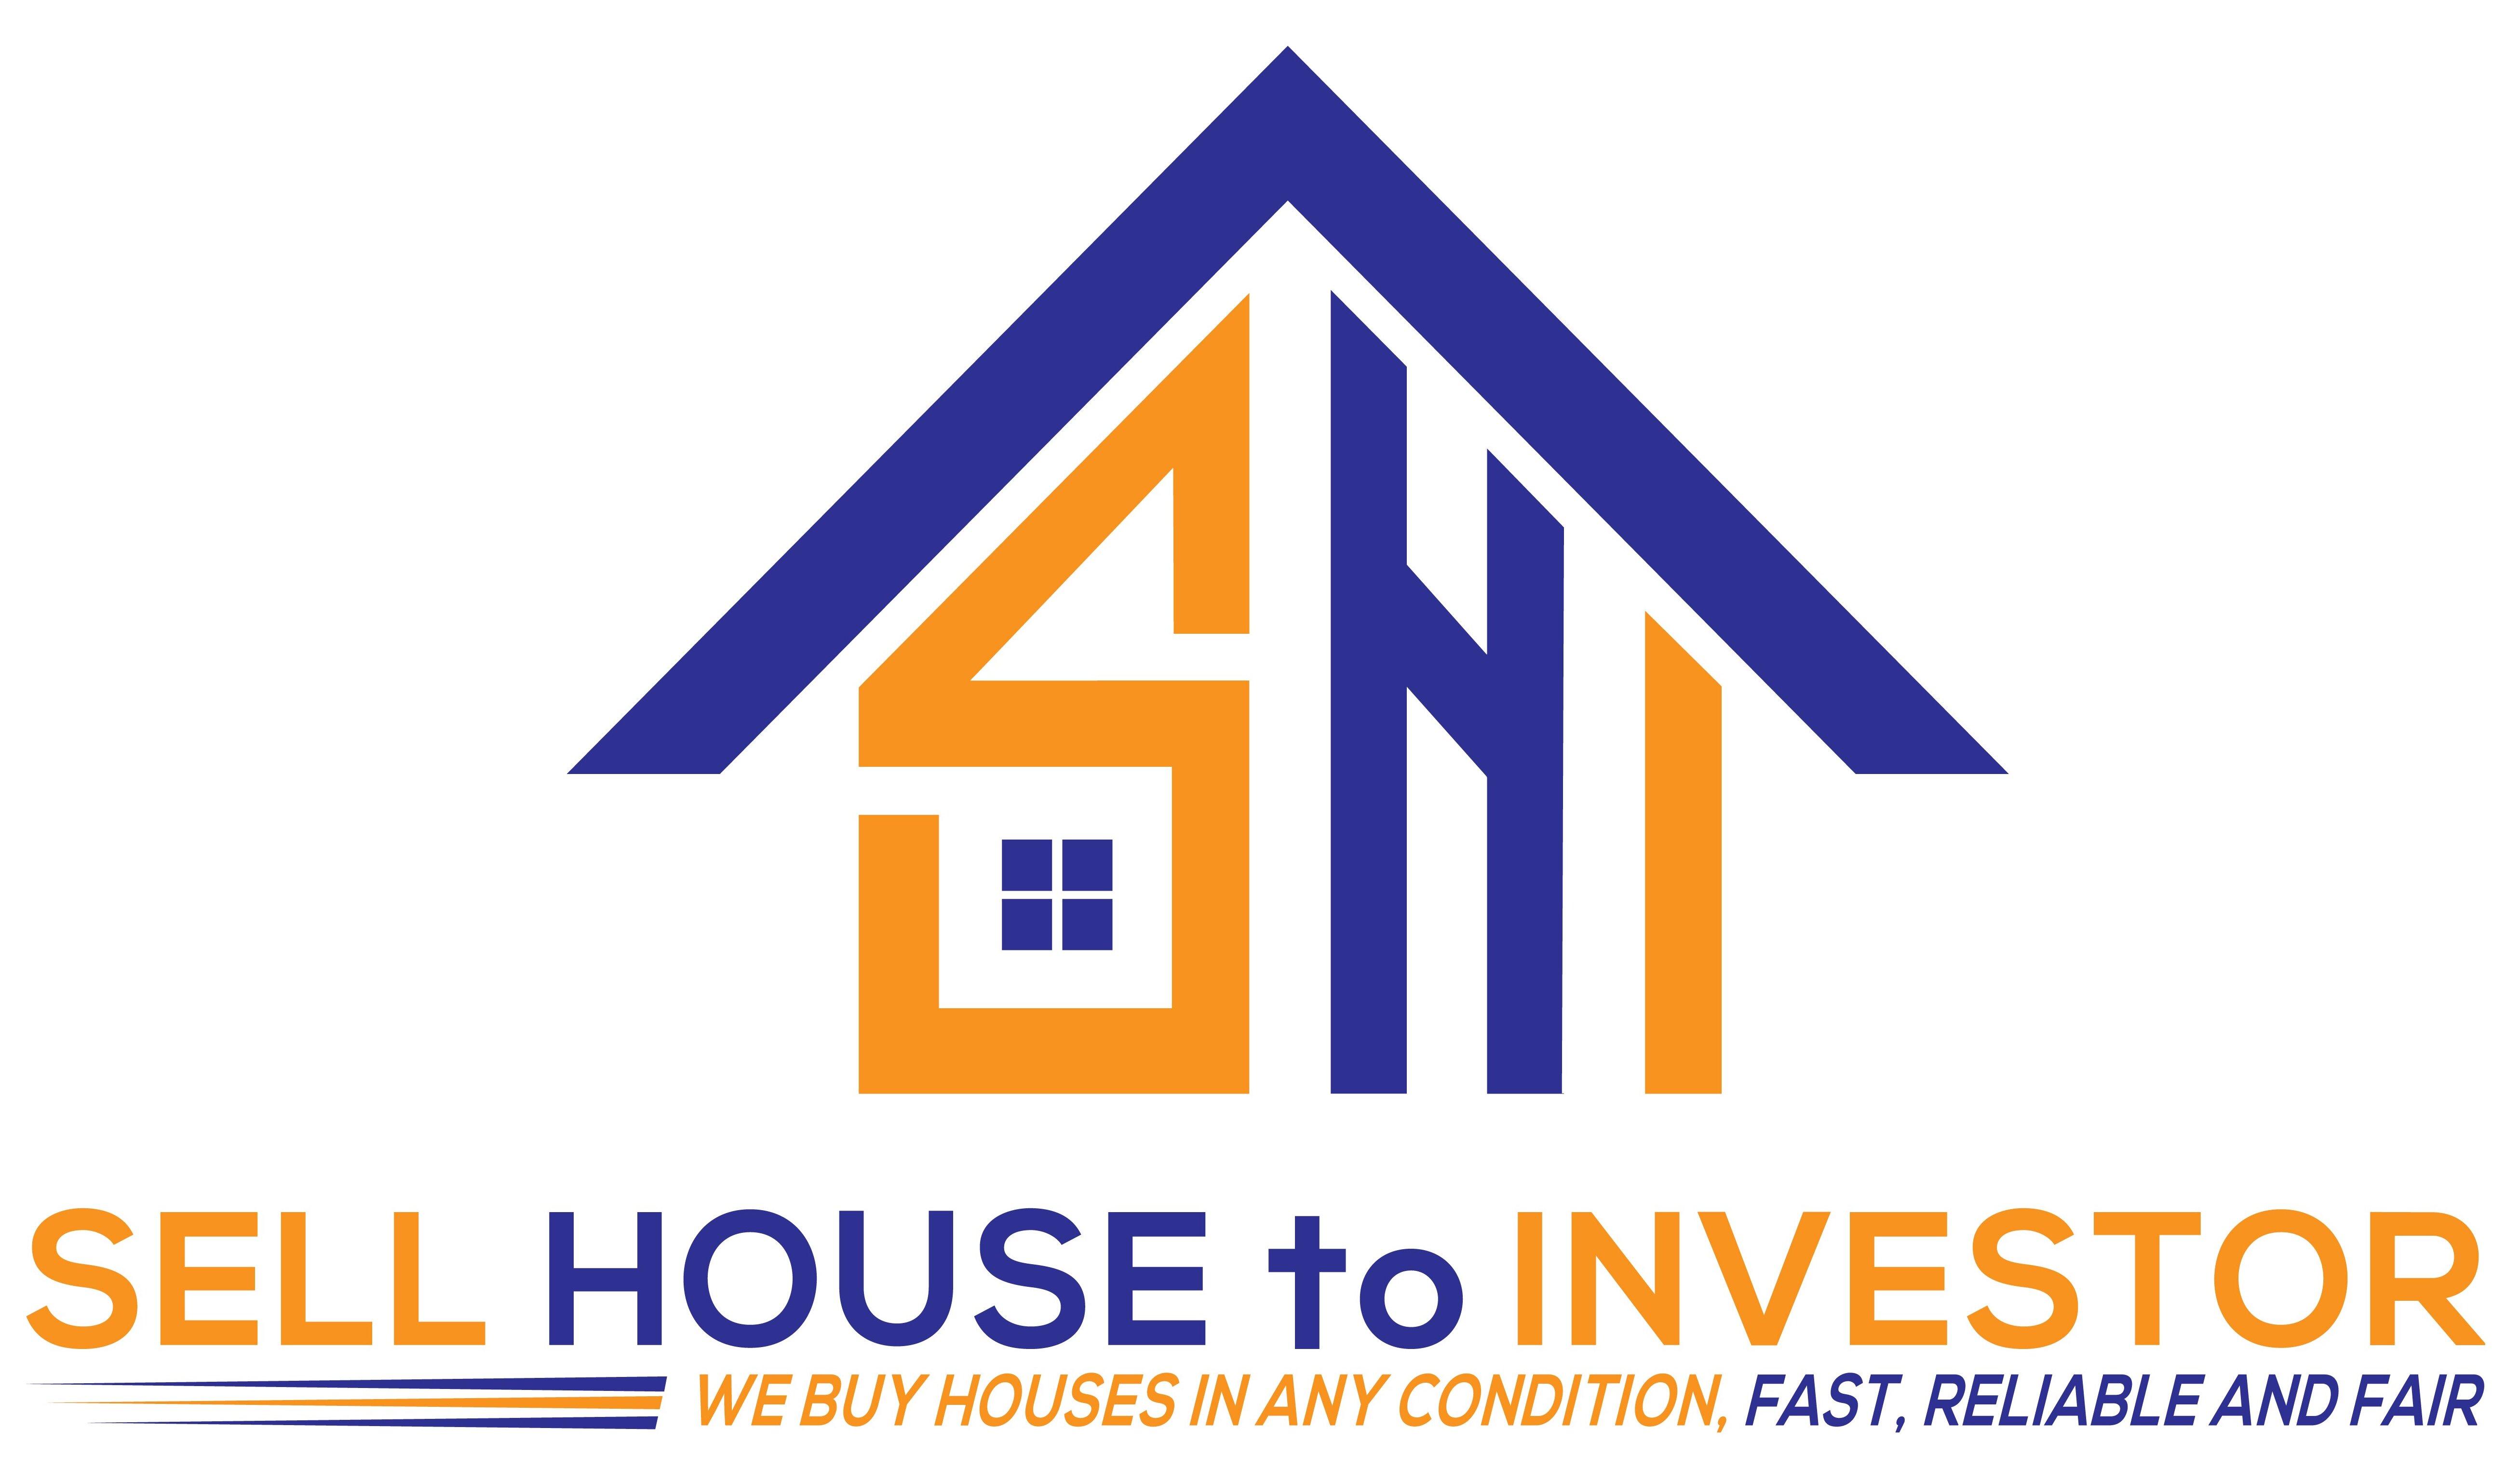 Sell House to Investor logo